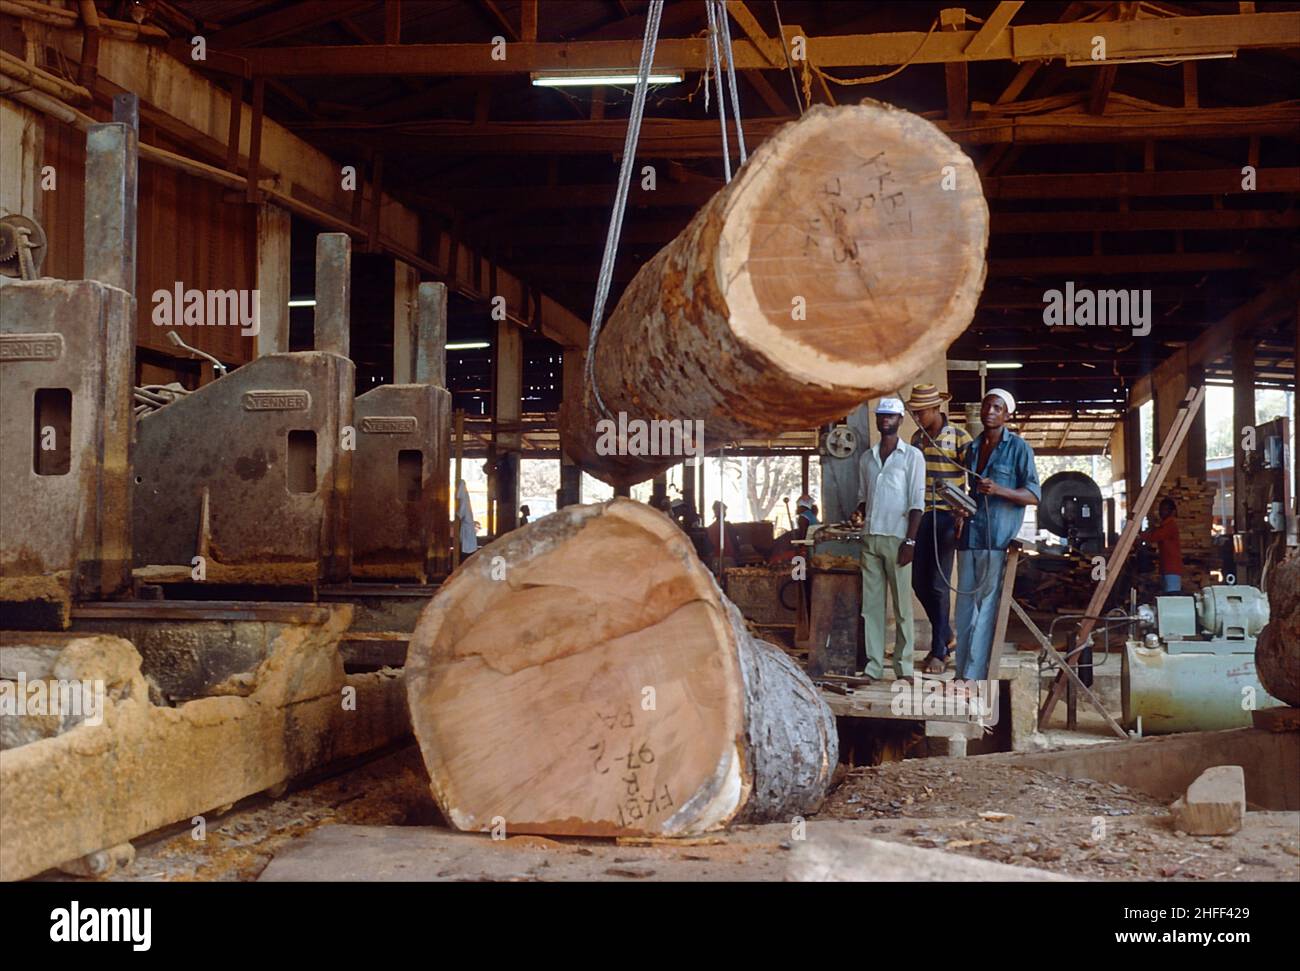 Sawmillworker lifting a heavy log towards a belt saw  in a sawmill near Accra, Ghana, West Africa. Stock Photo